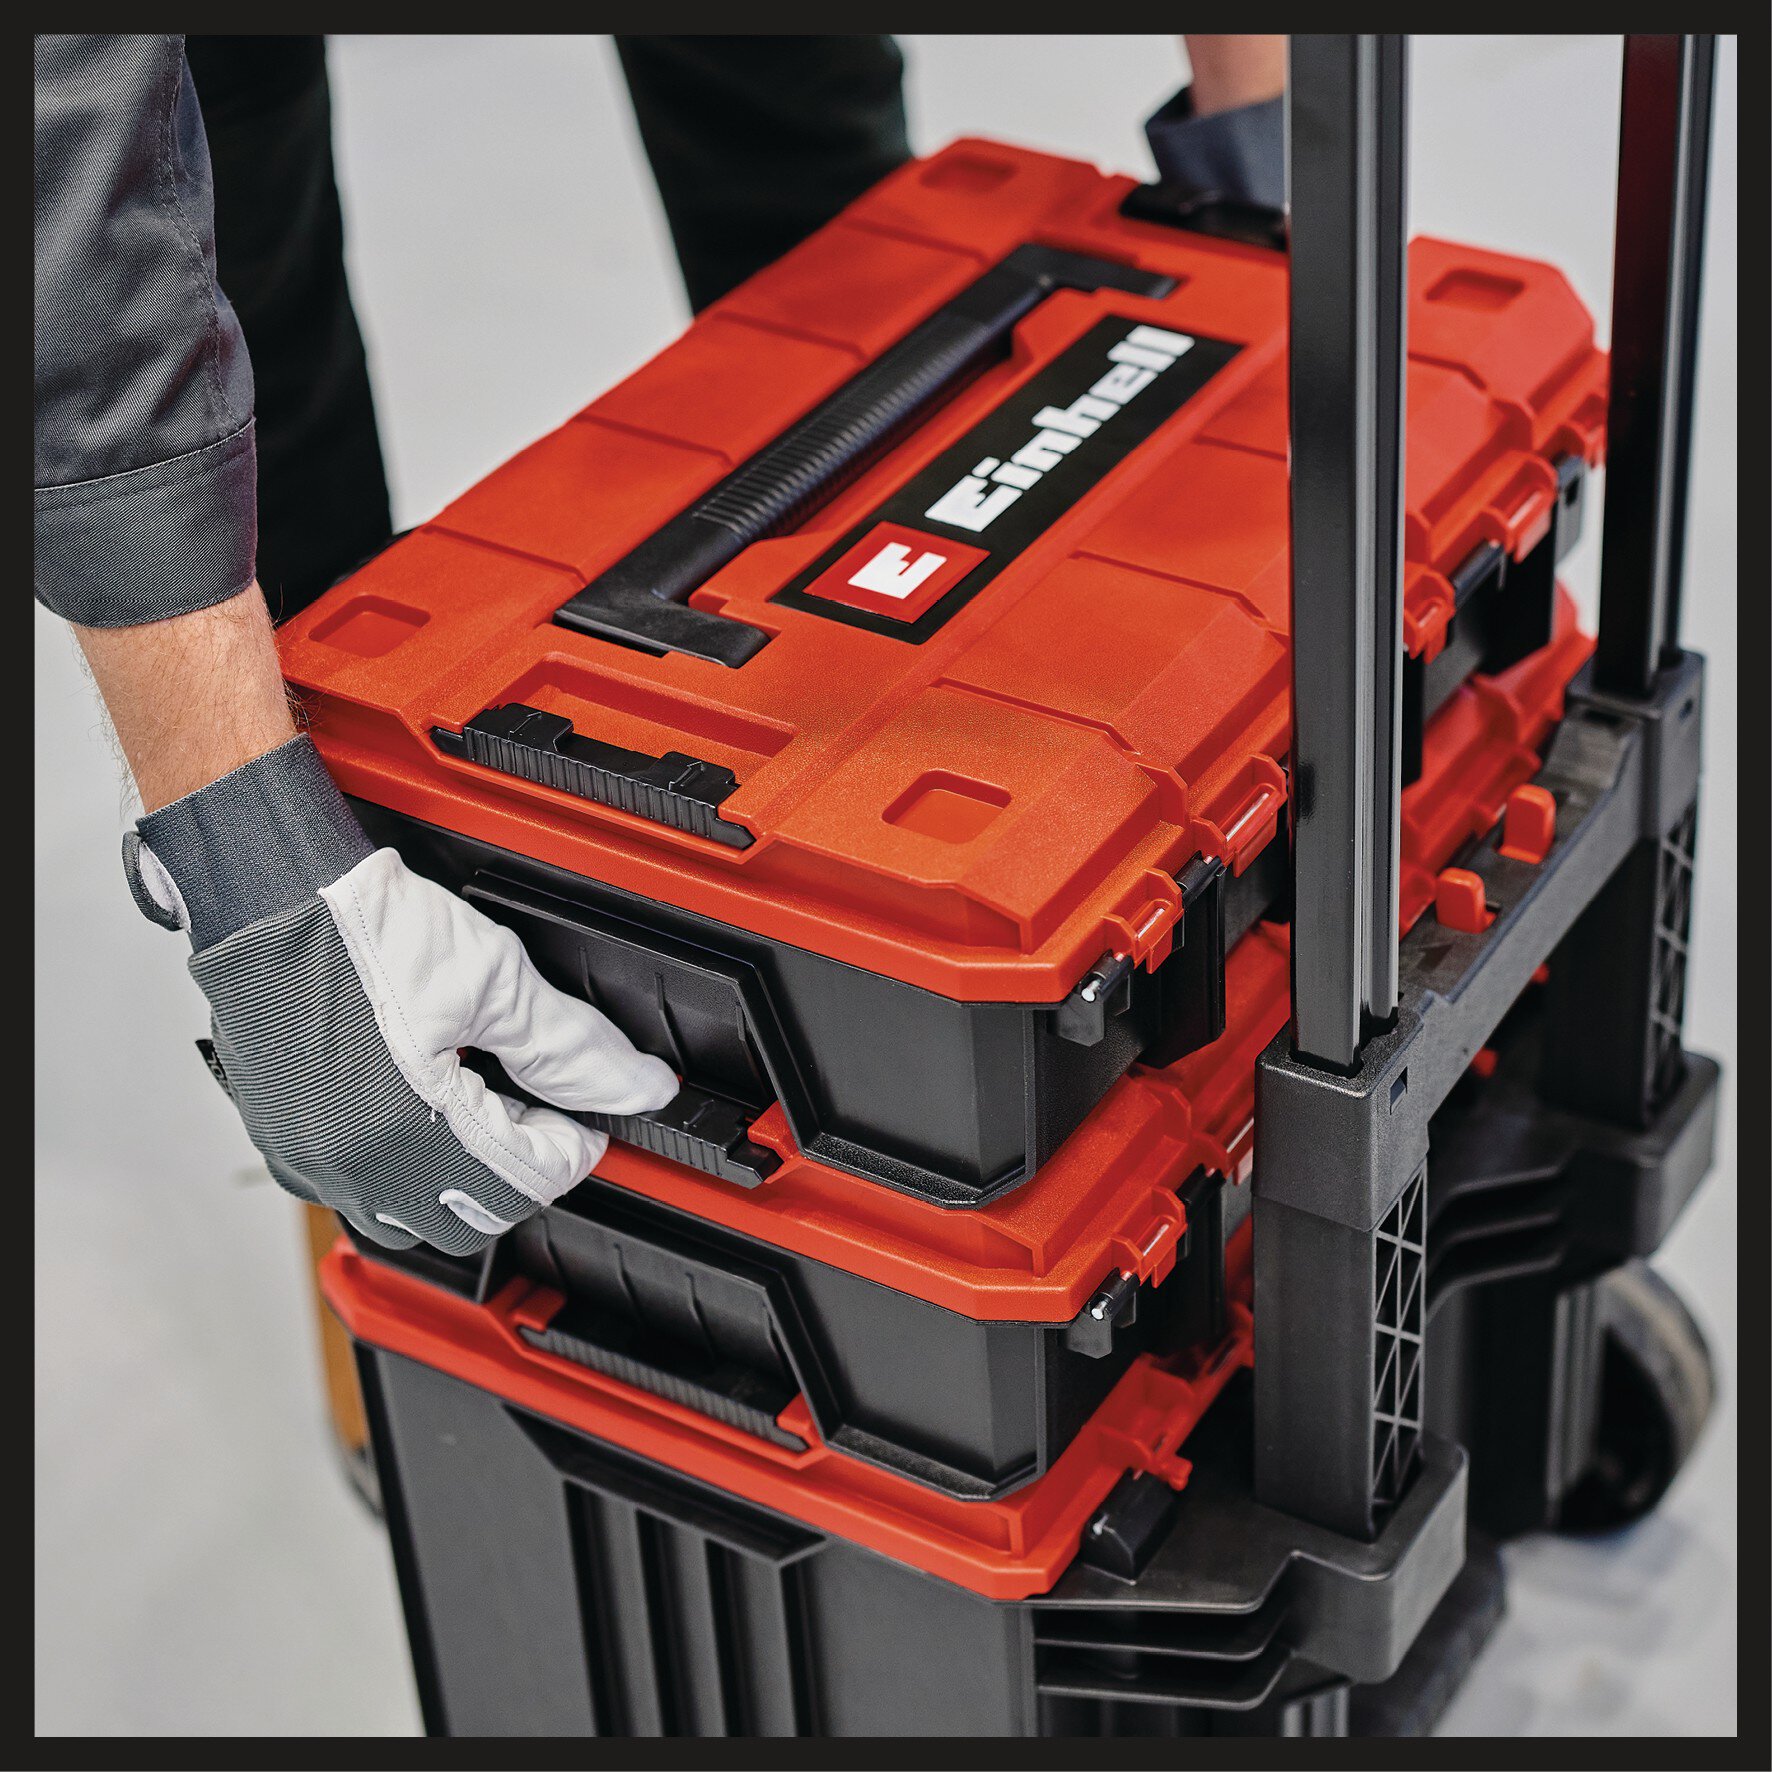 einhell-accessory-system-carrying-case-4540014-detail_image-001